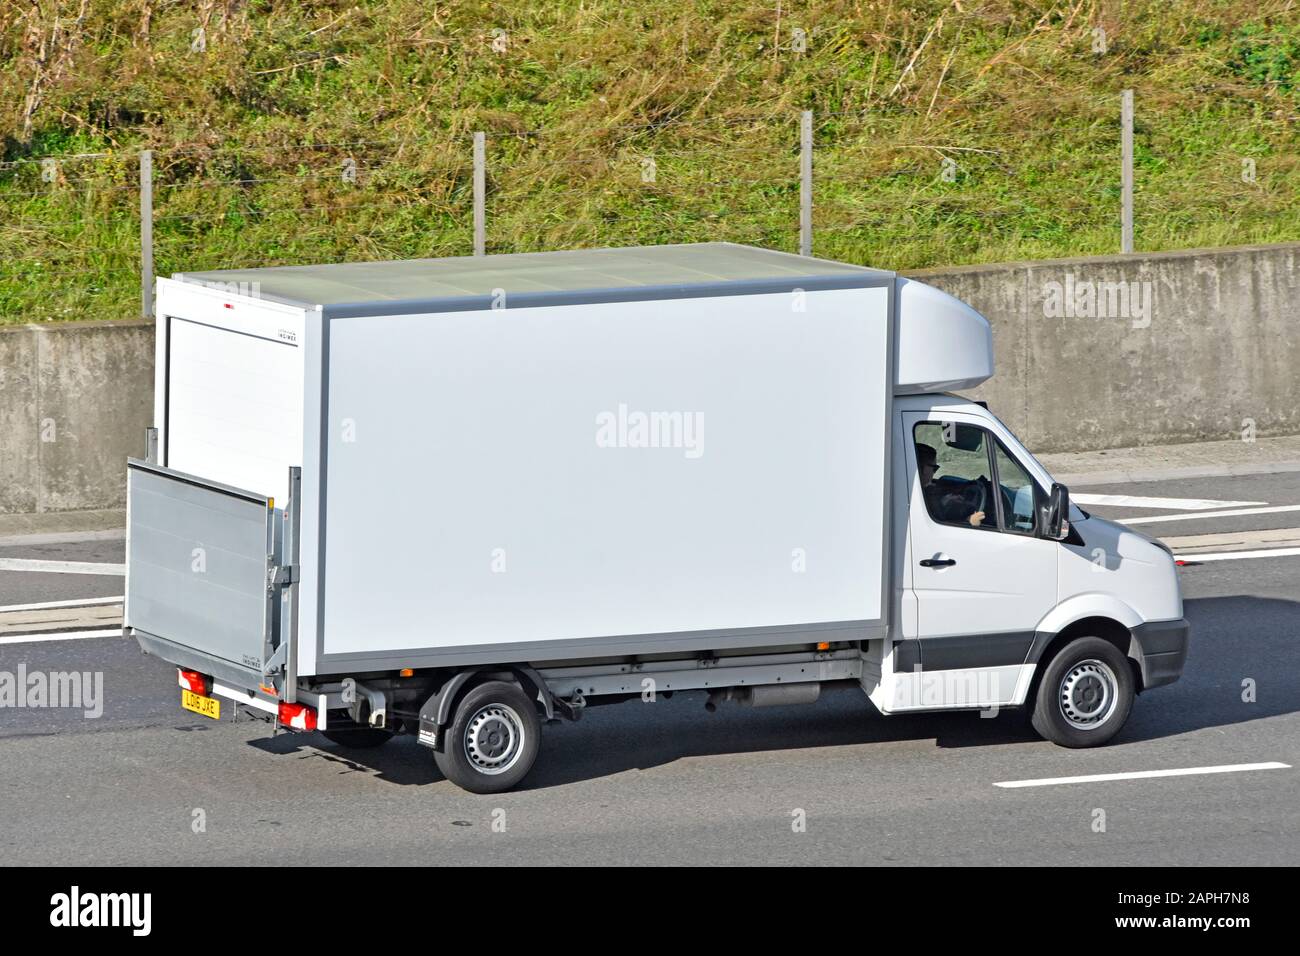 View from above side & back of white delivery van fitted with tailgate hoist for loading & unloading driver motoring along m25 motorway England UK Stock Photo